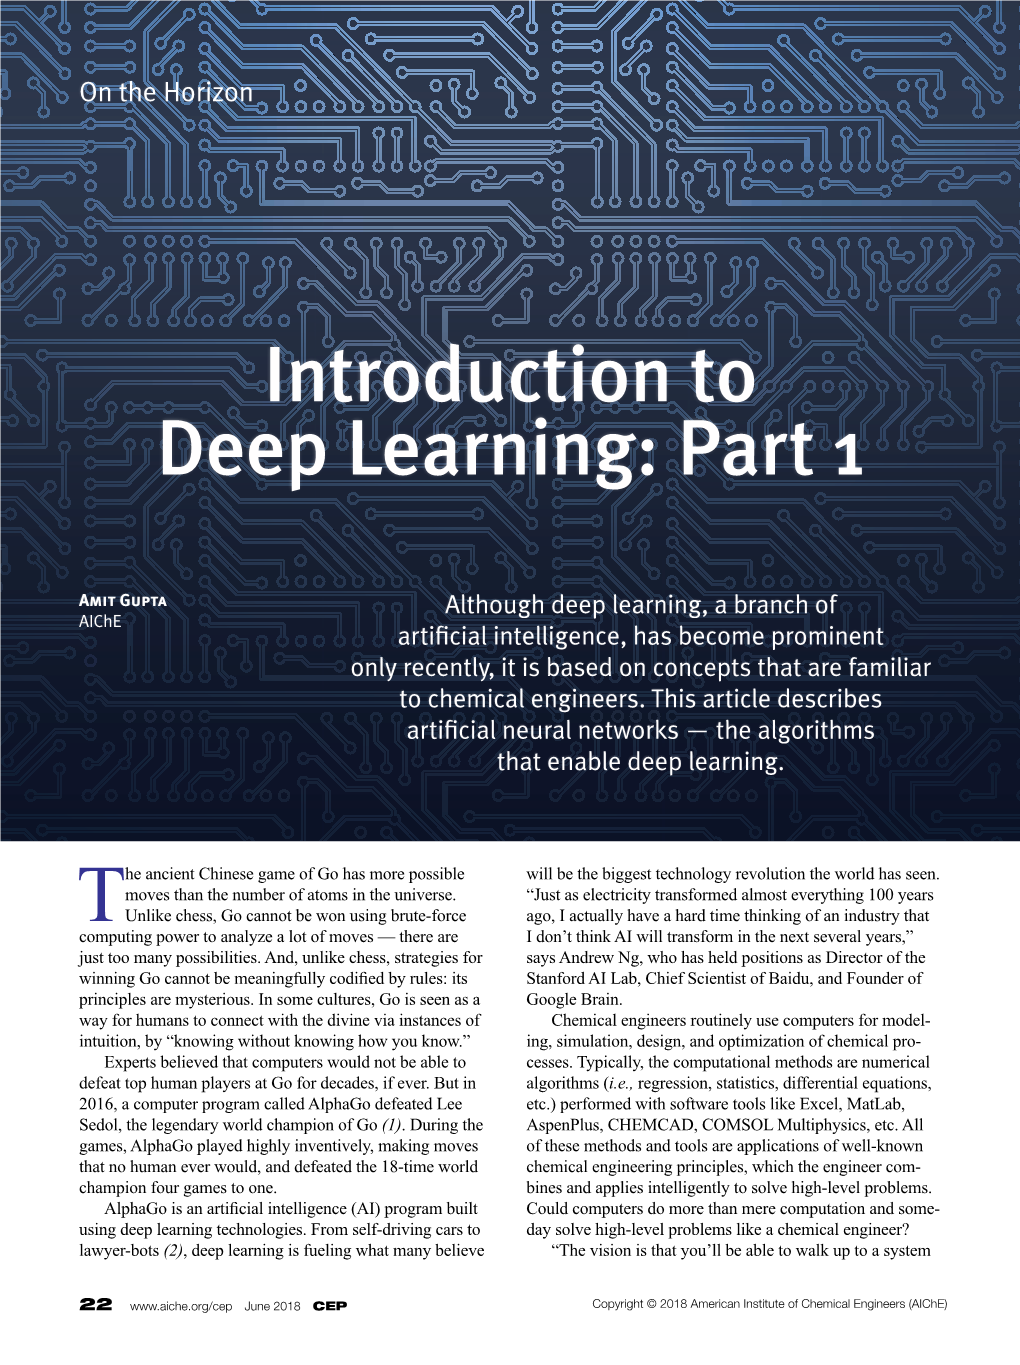 Introduction to Deep Learning: Part 1